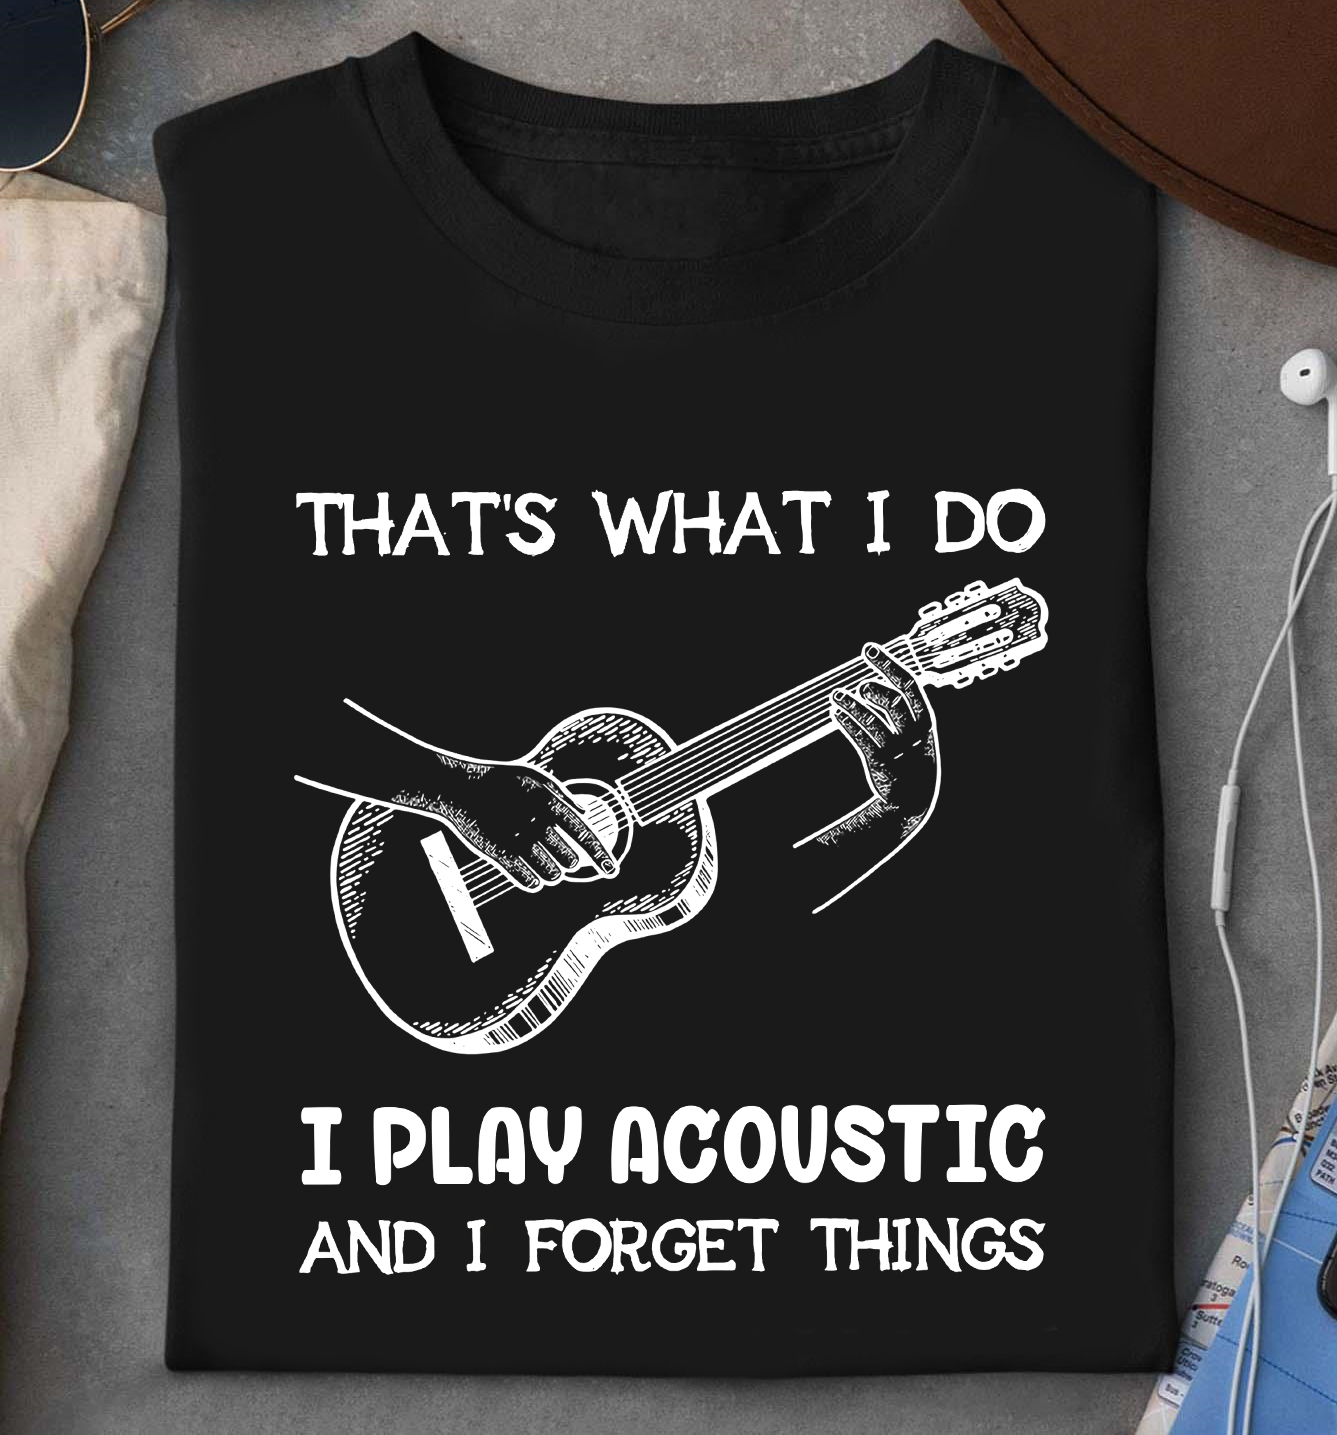 That's what I do I play acoustic and I forget things – Guitar lover